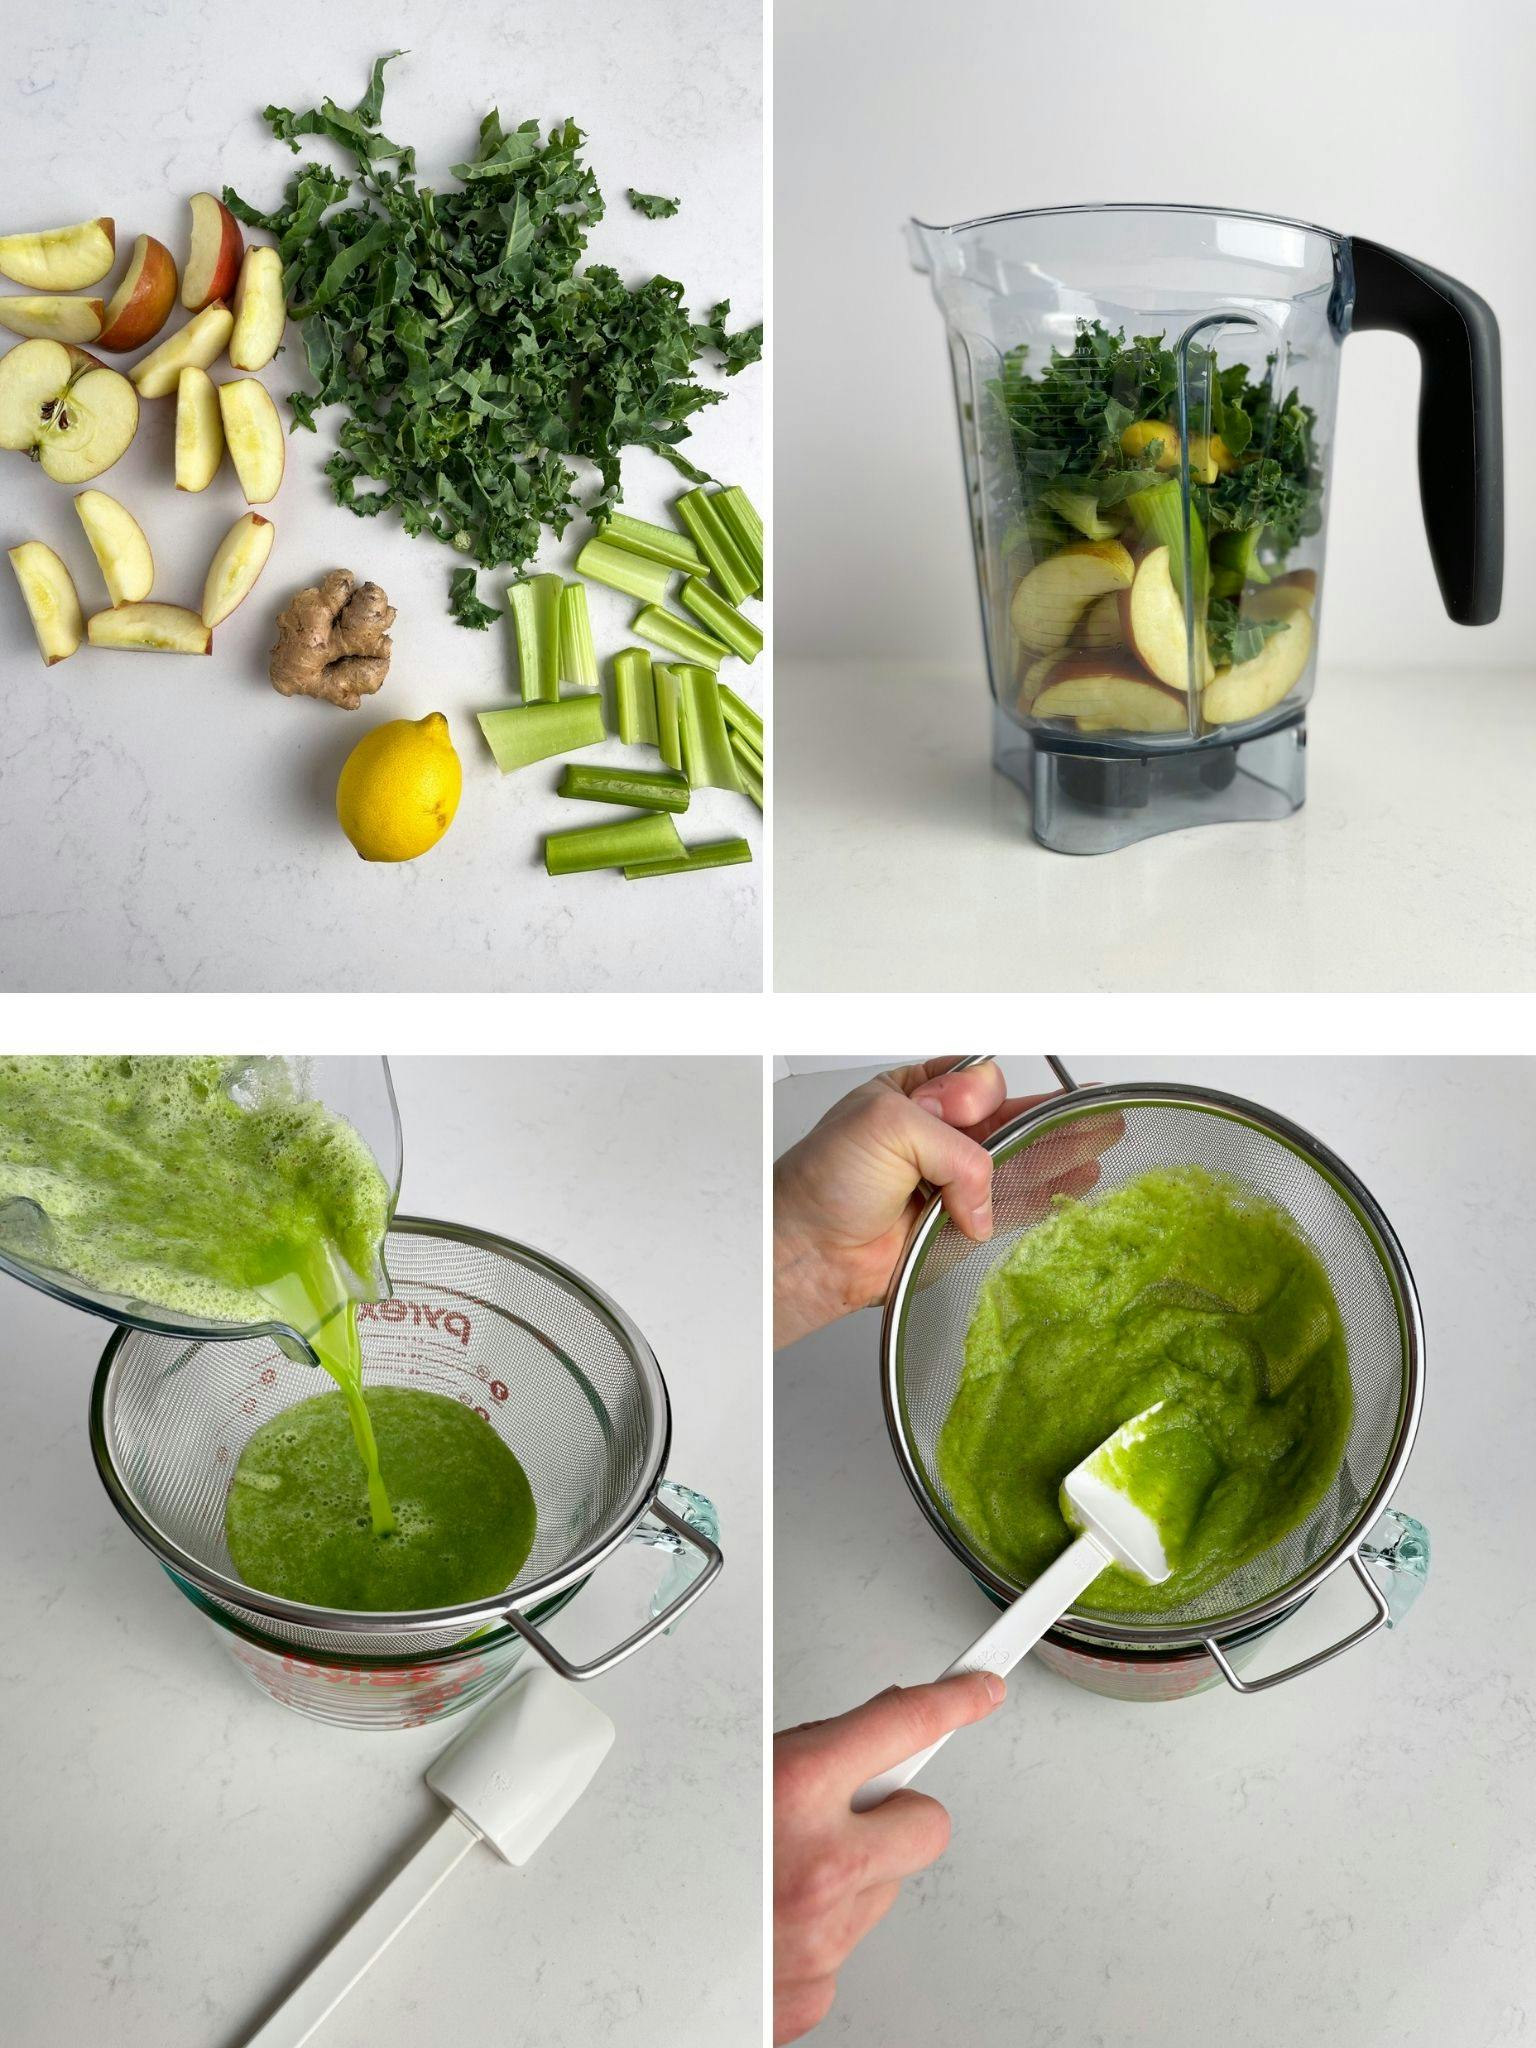 Step by step process of how to make the juice.